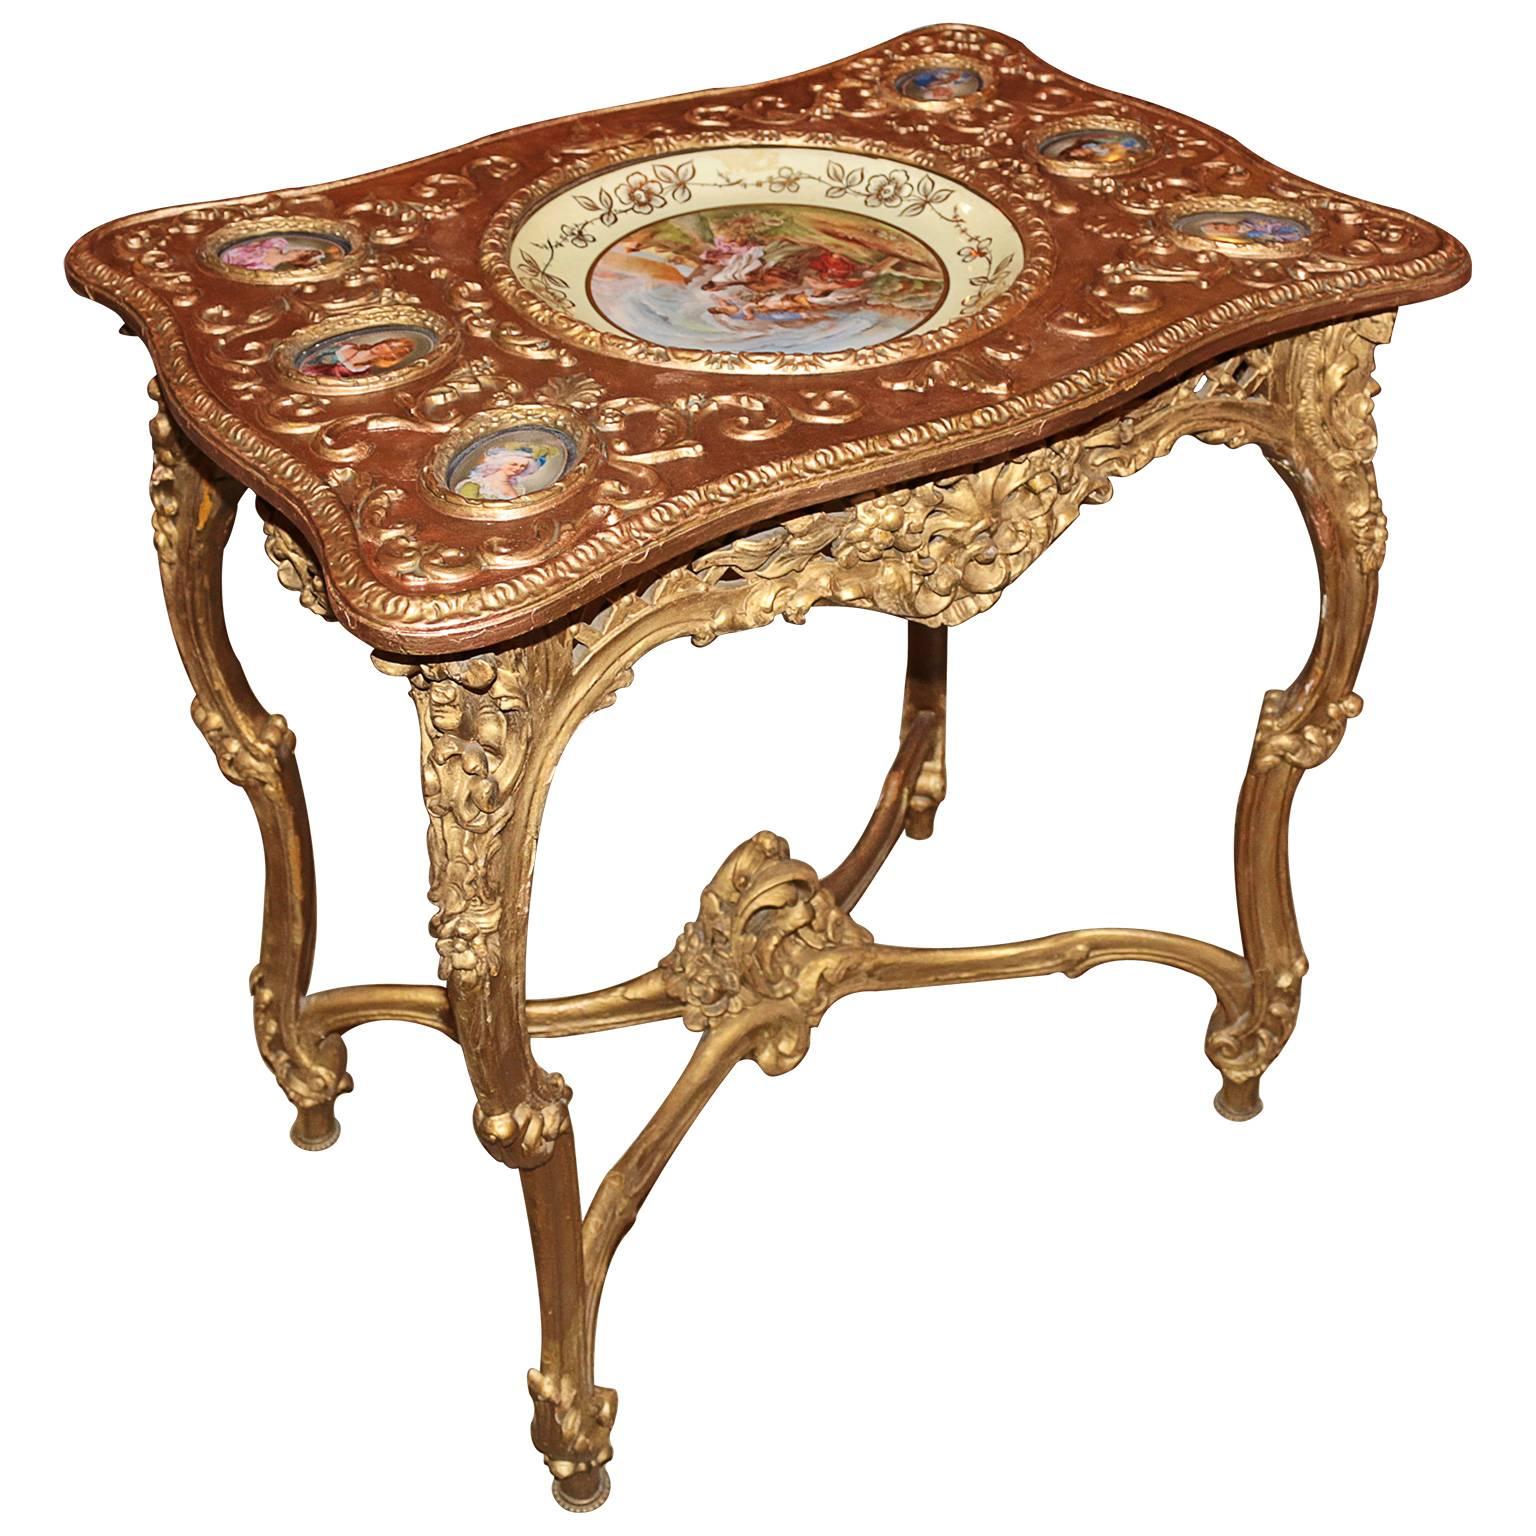 The beautiful curvy end table with six small porcelain hand-painted sevres plaques to both sides of one larger hand-painted center plate. The plaques are in great condition and have little to wear consistent with age. This end table has great